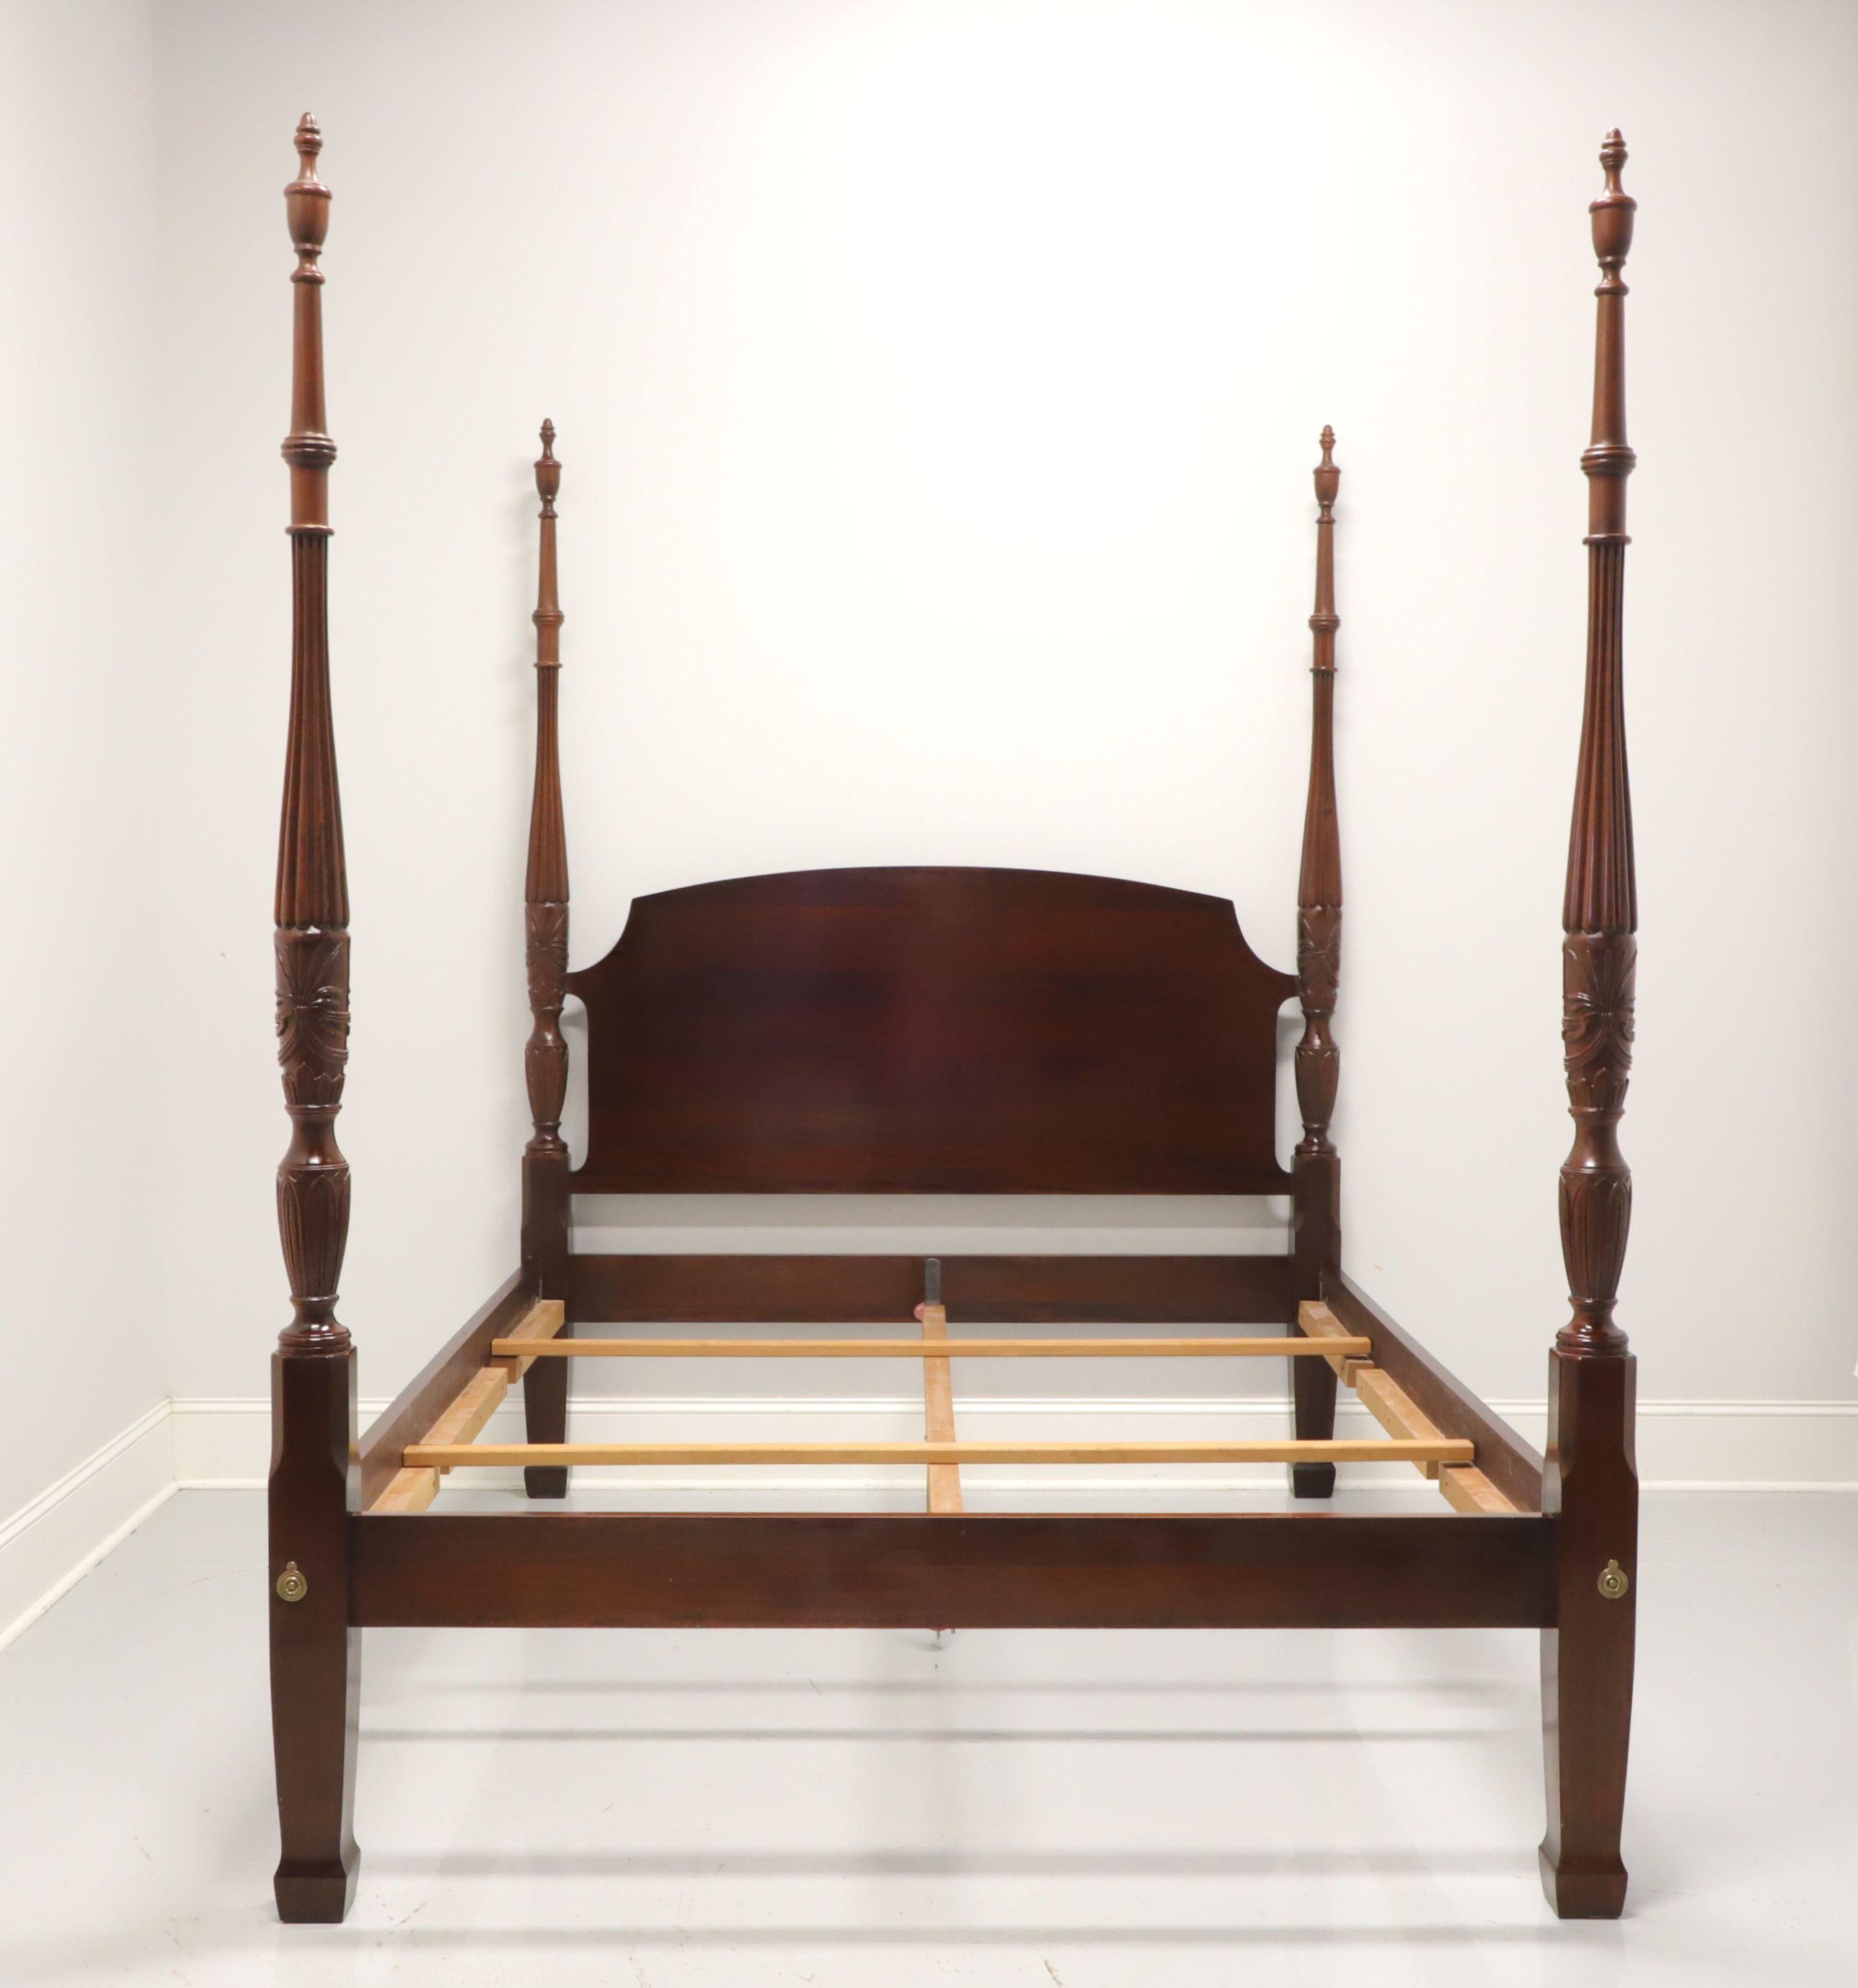 A traditional style queen size four post rice bed by Wellington Hall. Solid mahogany with four rice and tobacco carved motif posts with finials, brass accents to footboard, and spade feet. Center wood mattress support affixes to metal supports on